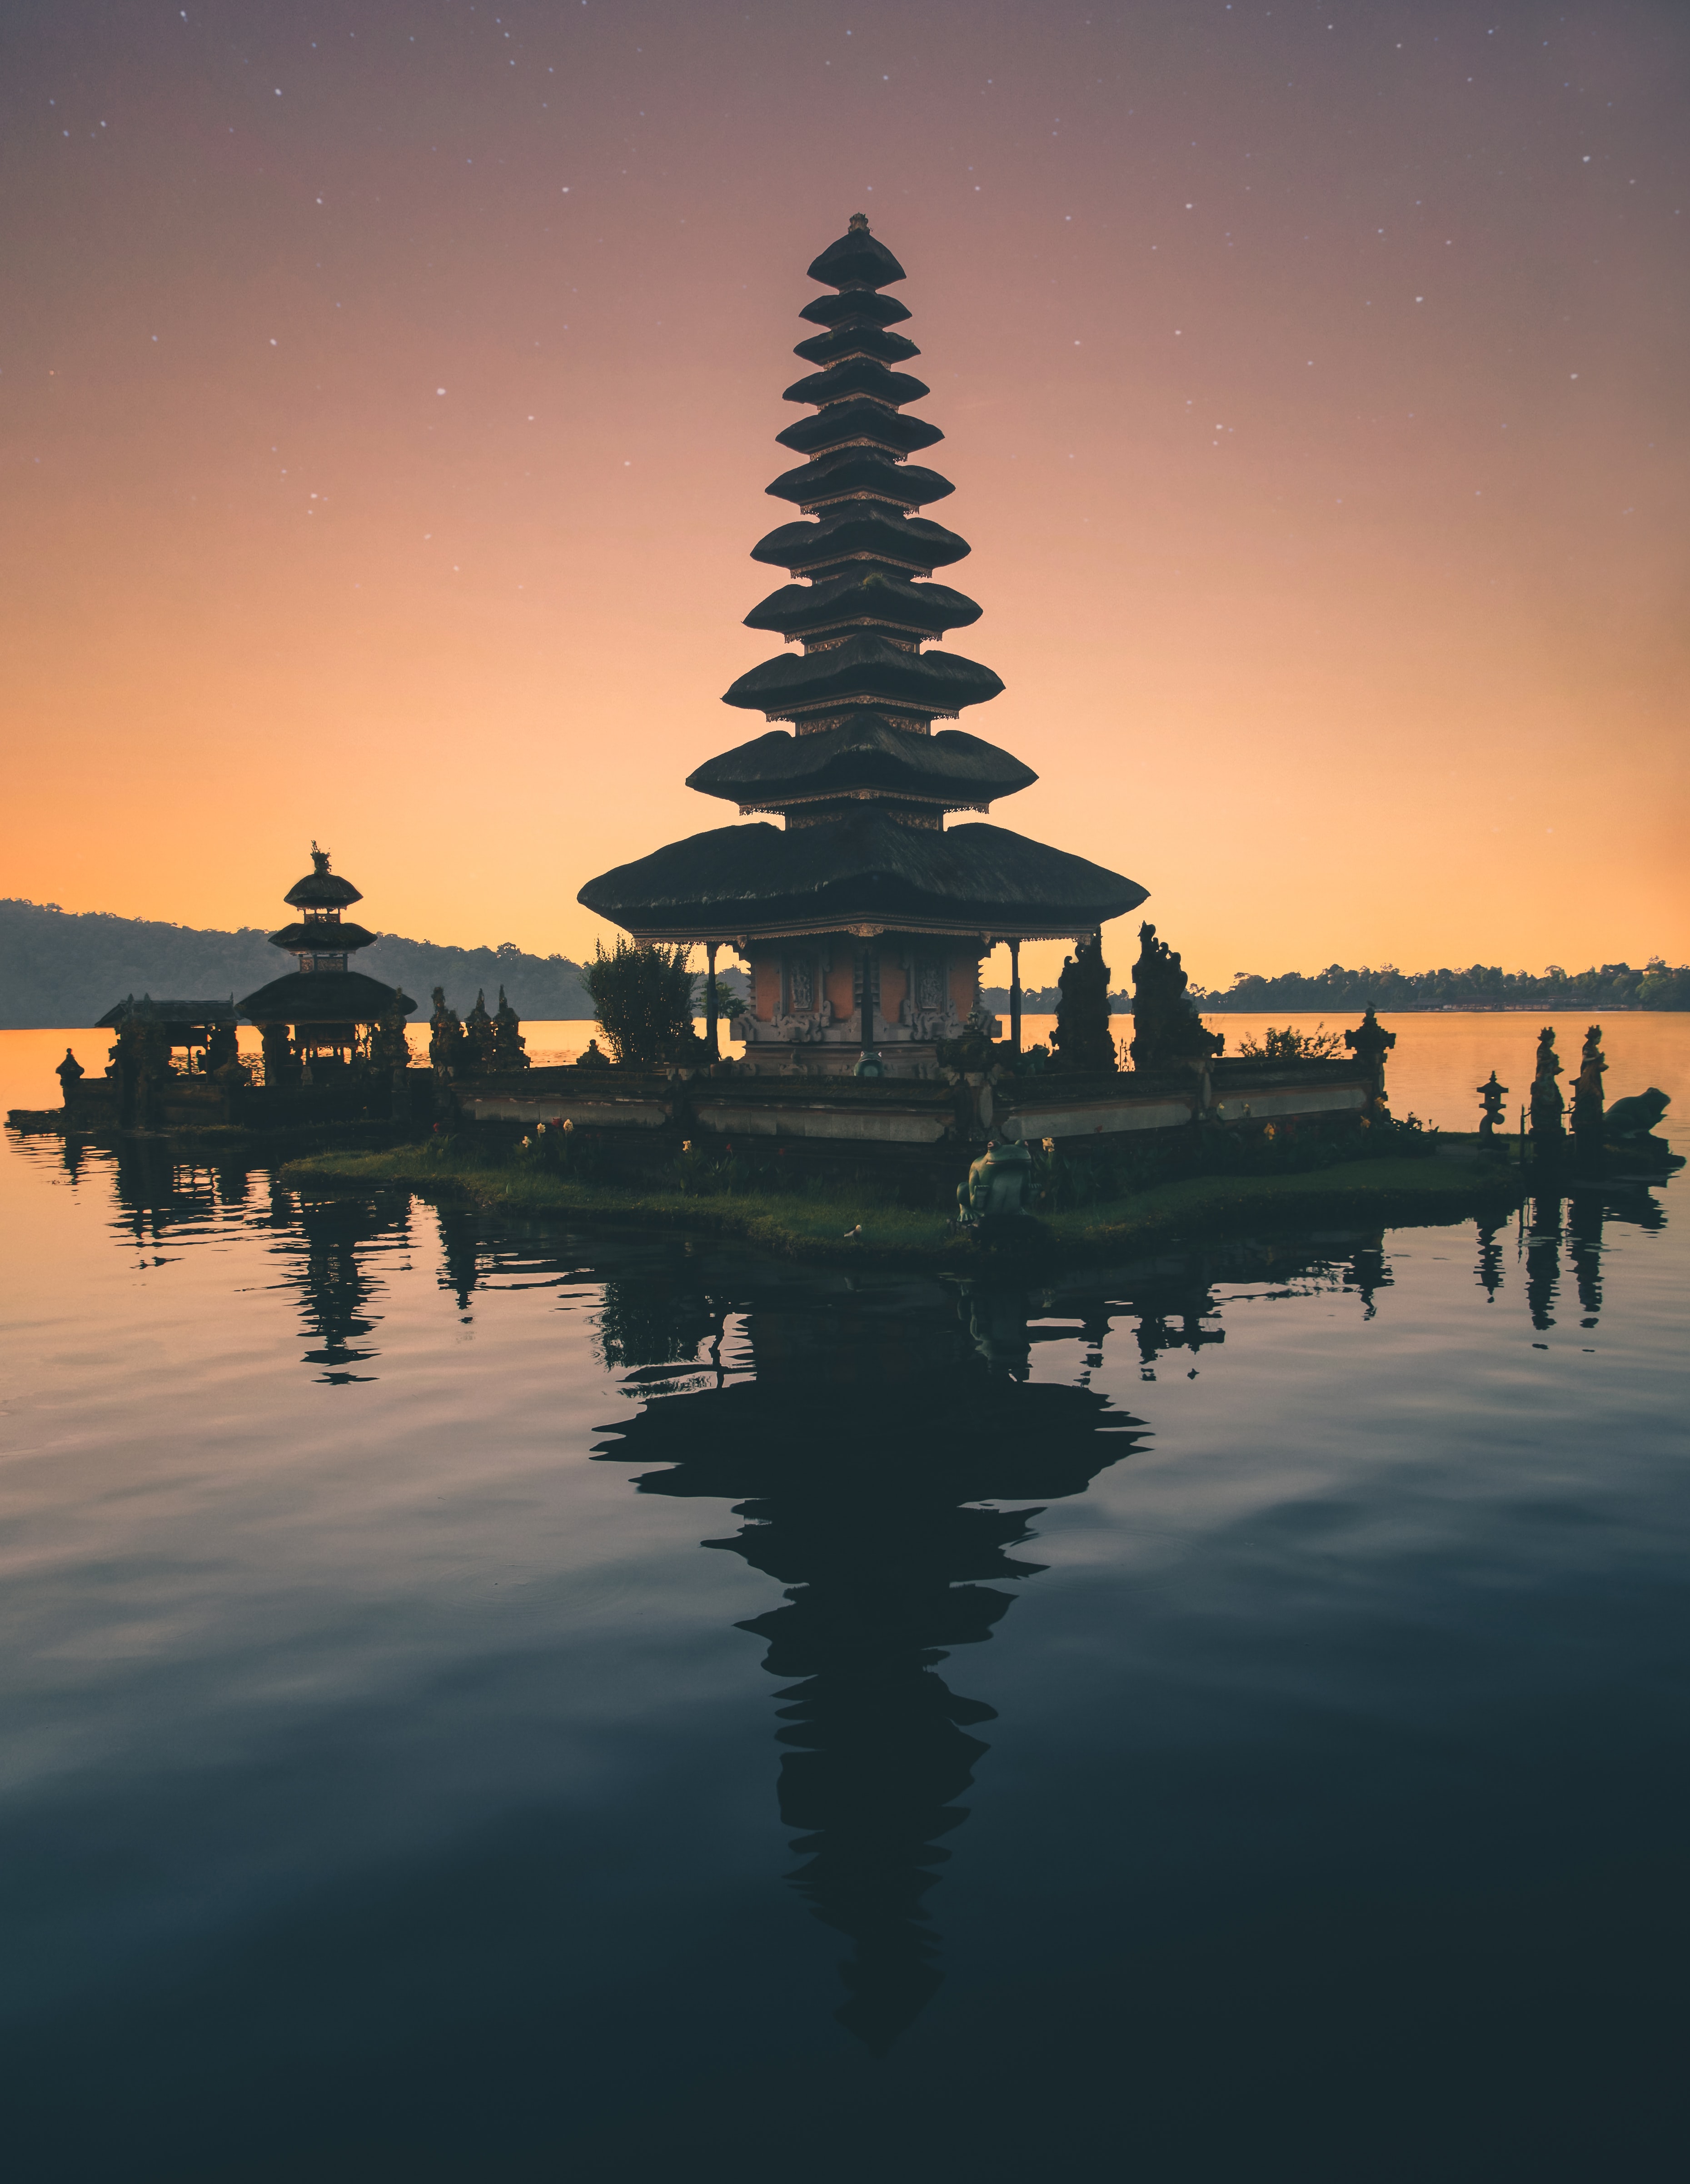 bali, cities, water, tower, temple